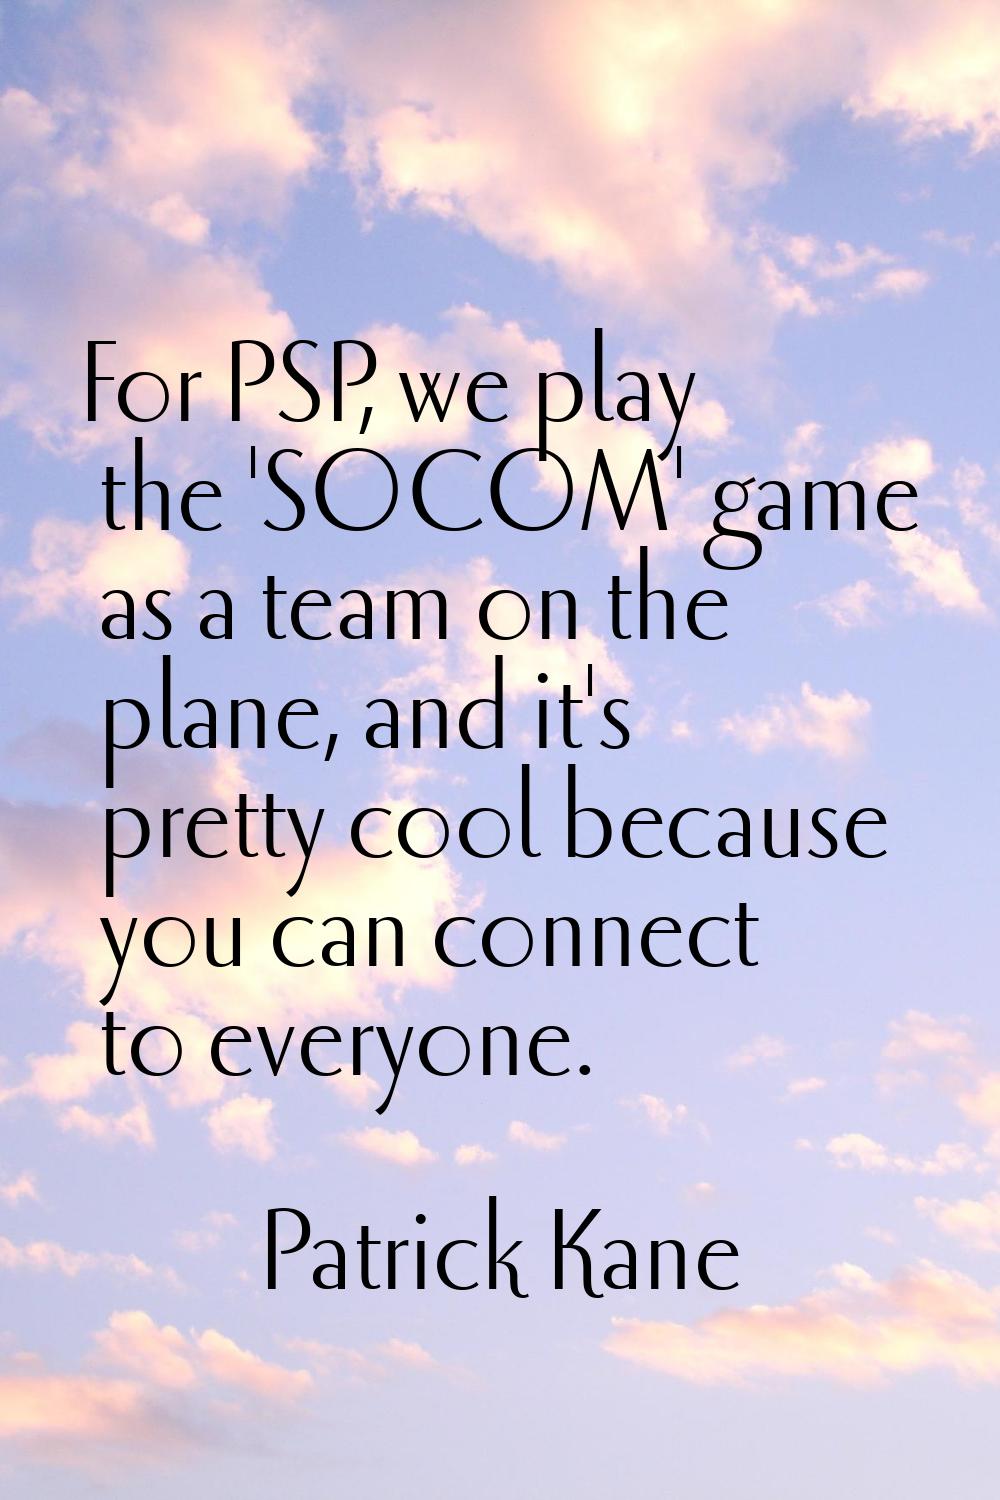 For PSP, we play the 'SOCOM' game as a team on the plane, and it's pretty cool because you can conn